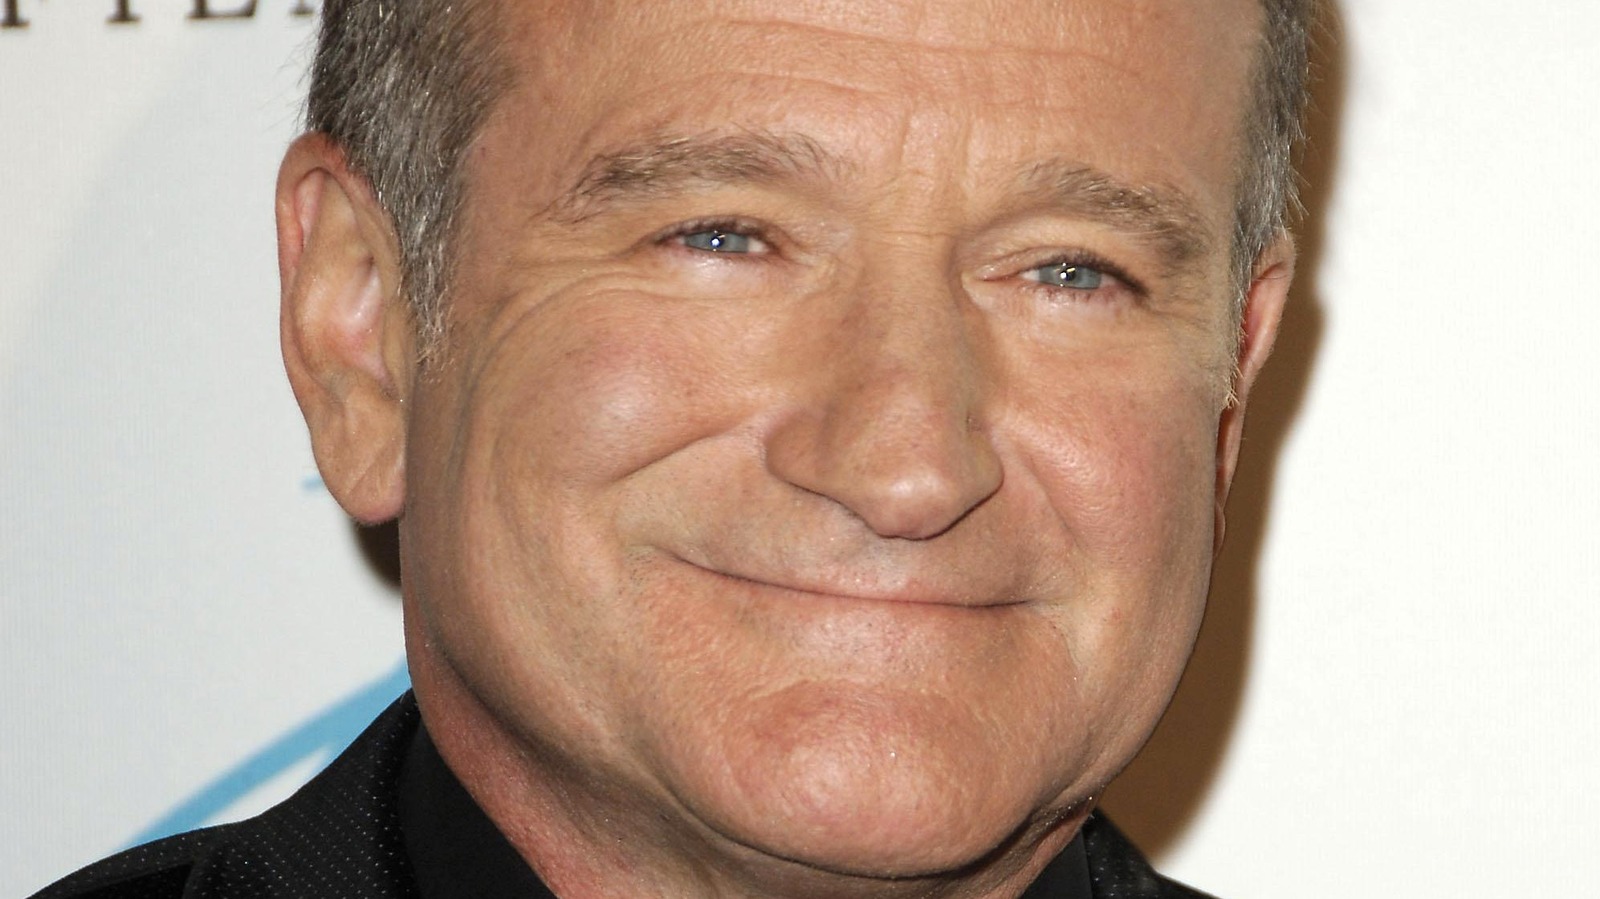 Robin Williams  Biography, Movies, Awards, Death, & Facts